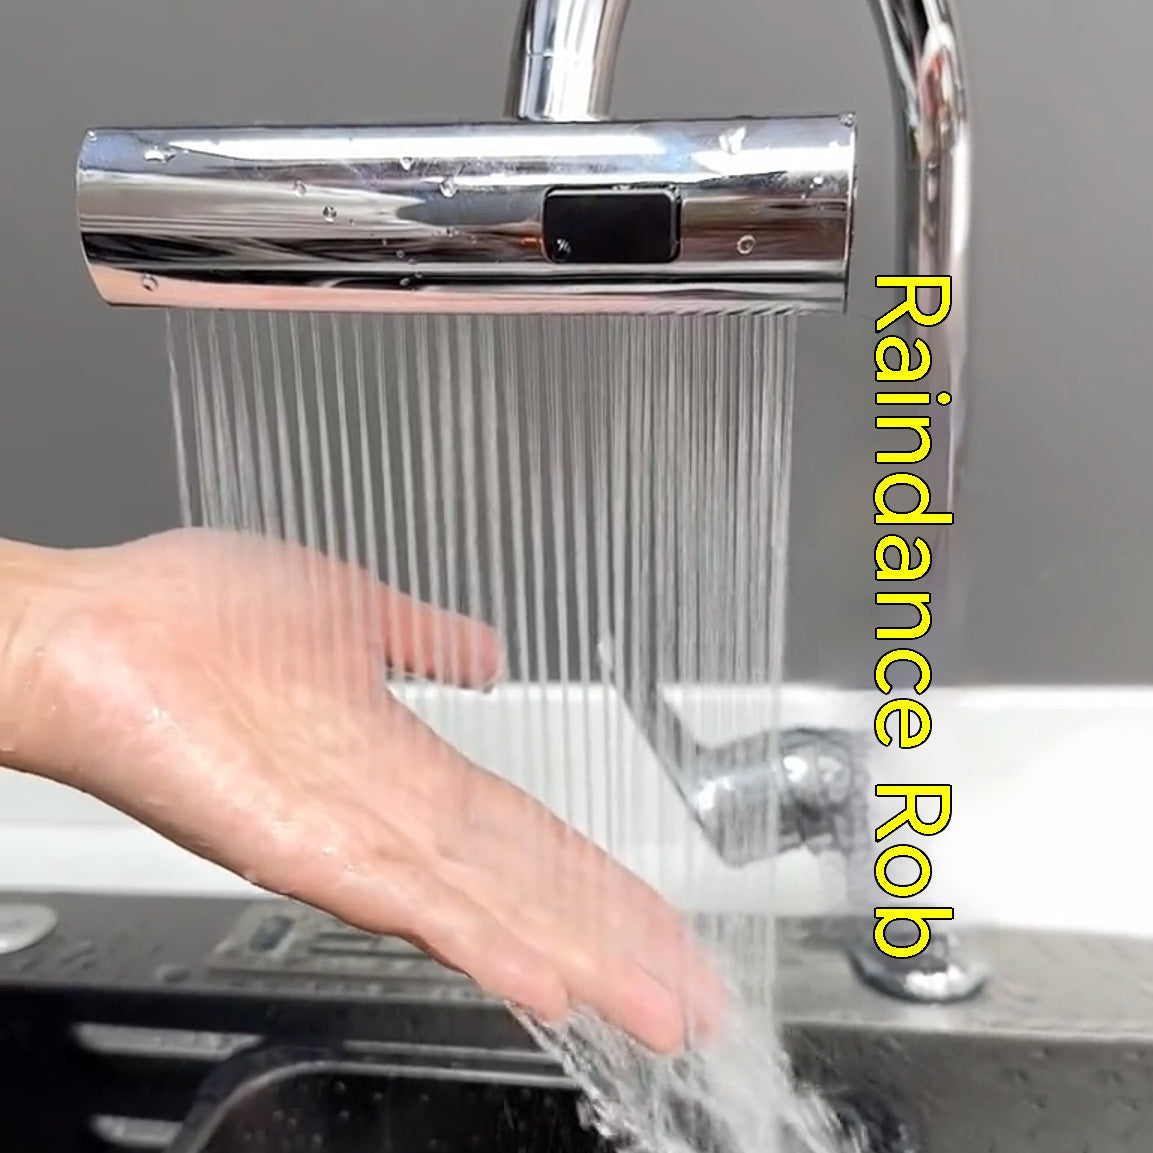 Kitchen Faucet Waterfall Nozzle Extension - Everyday-Sales.com